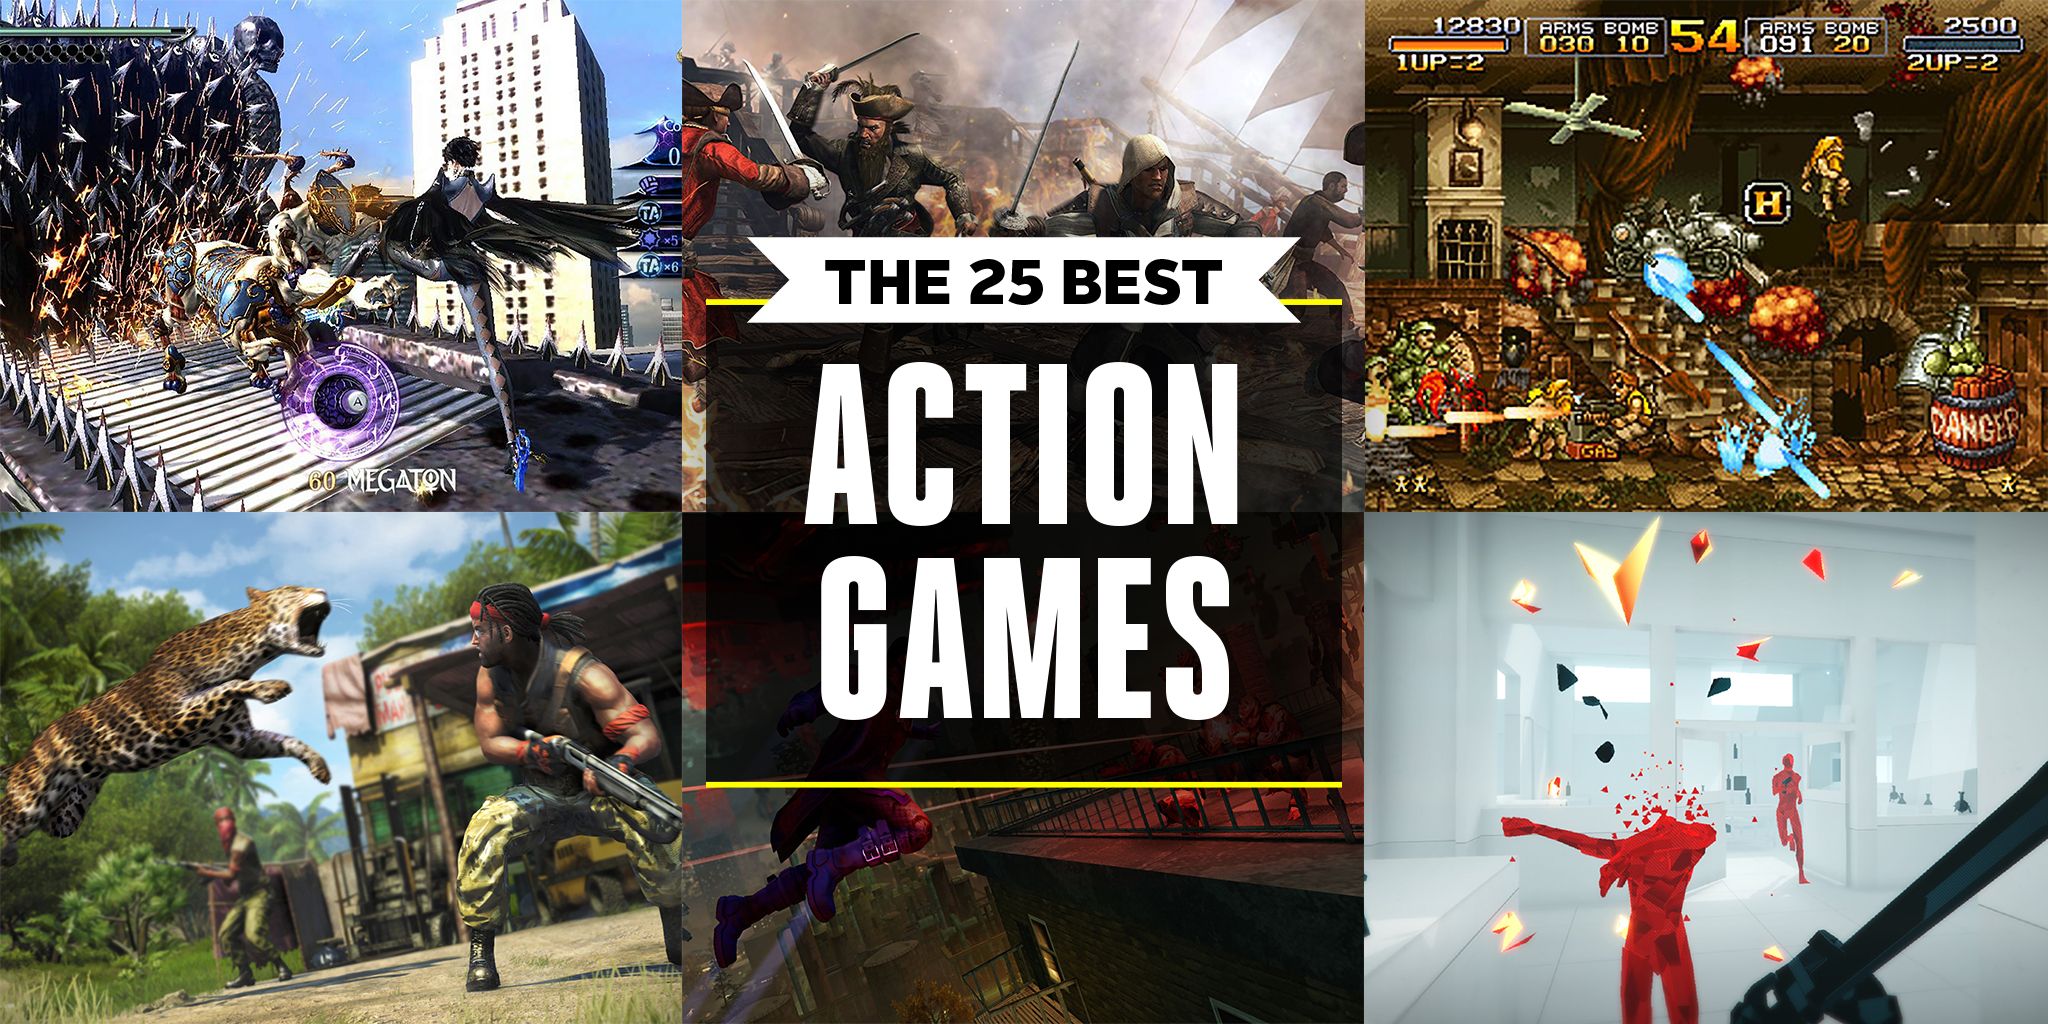 Best Quest Action Games: 10+ Combat Titles To Play Now